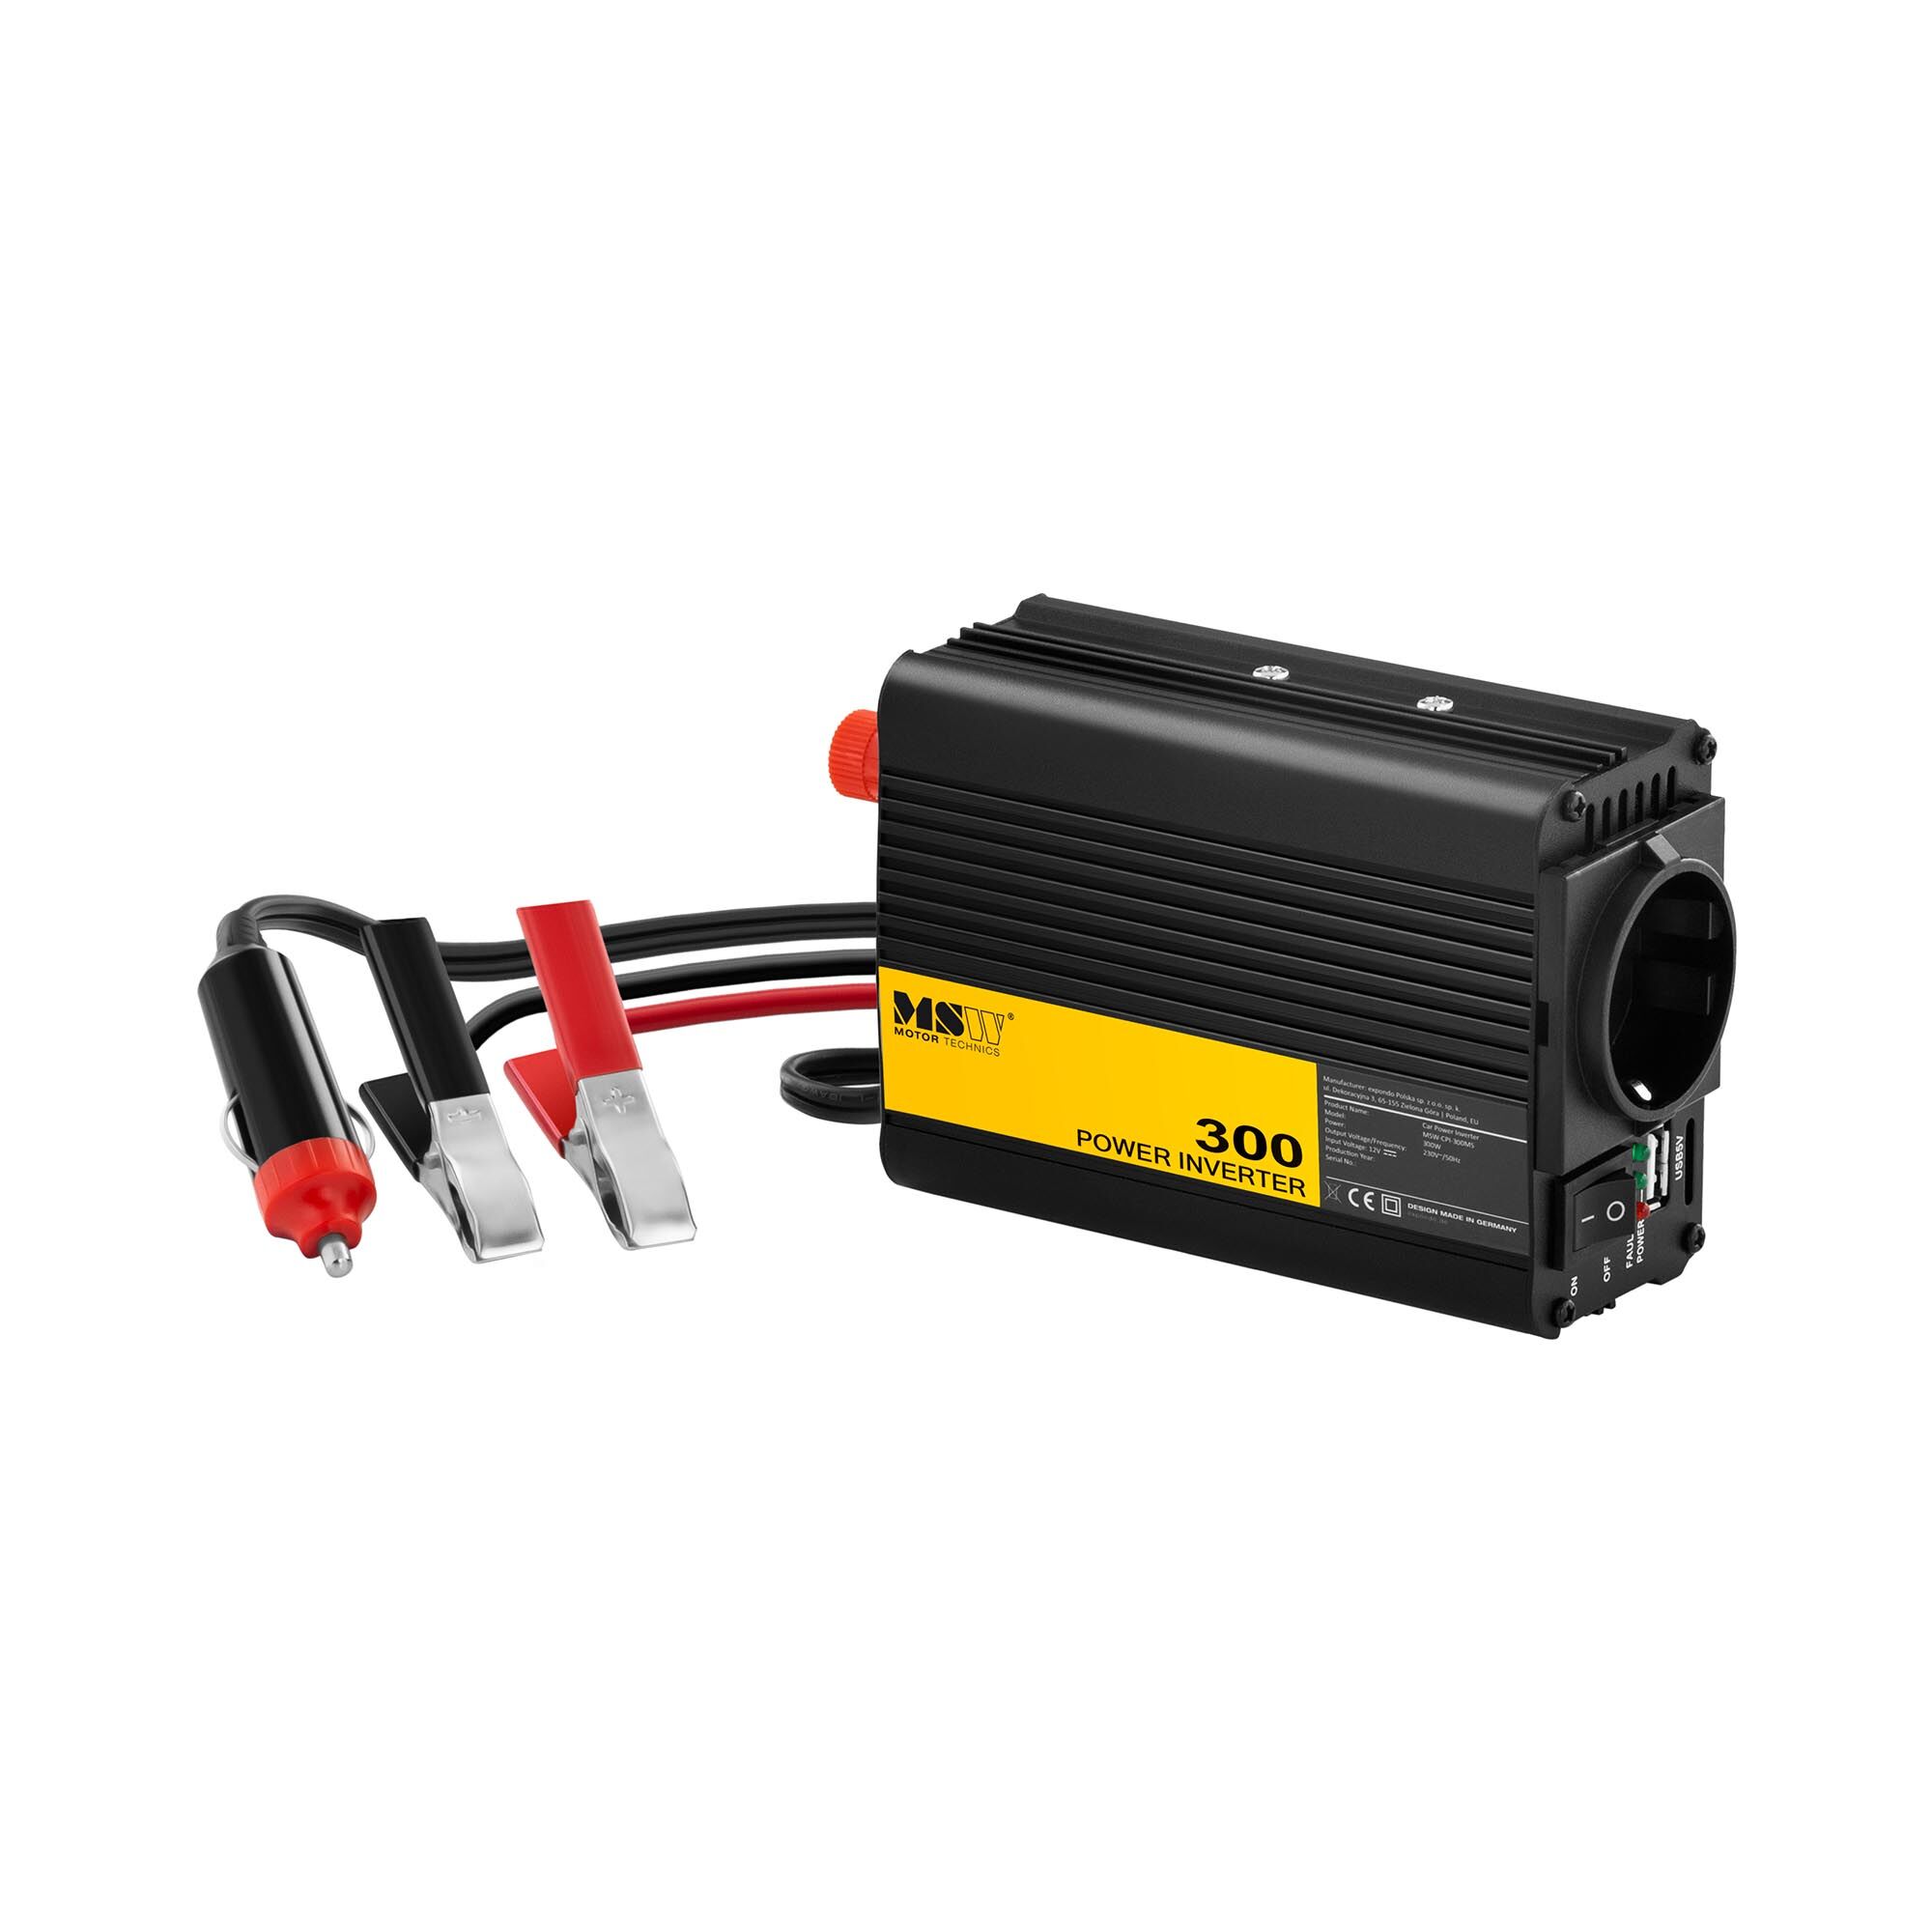 MSW Factory seconds Power inverter - 300 W MSW-CPI300MS